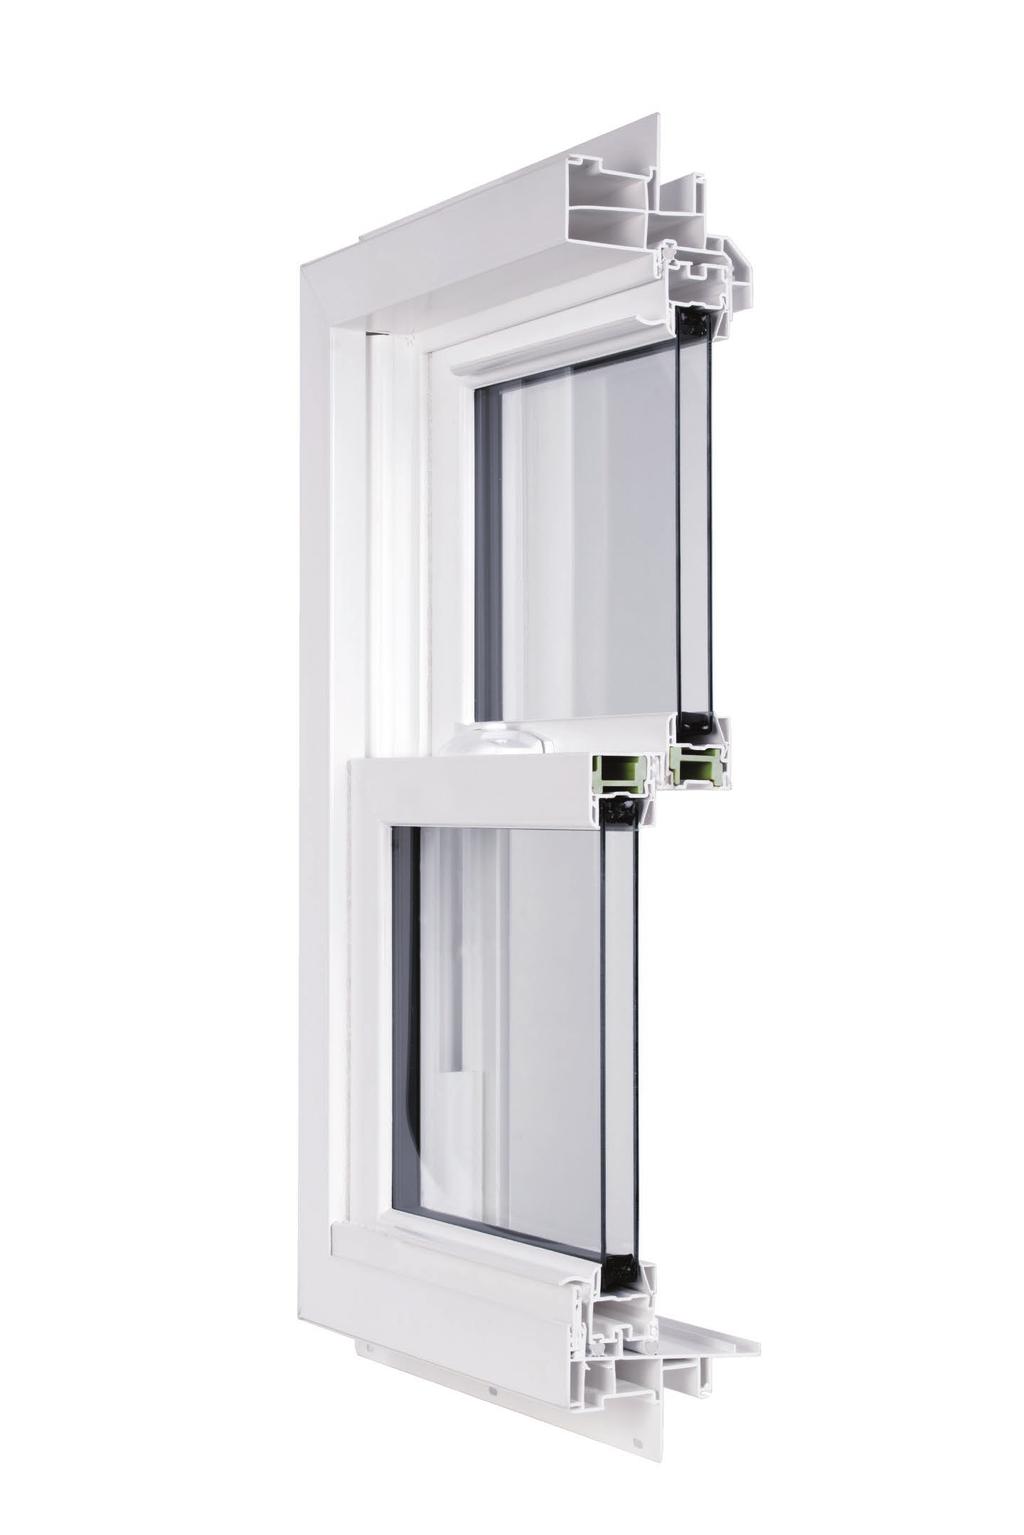 PERFORMS WITH STYLE The Energex Elite window system is a high-performance window system, with enhanced structural and thermal performance for use in renovation and remodeling, and new construction